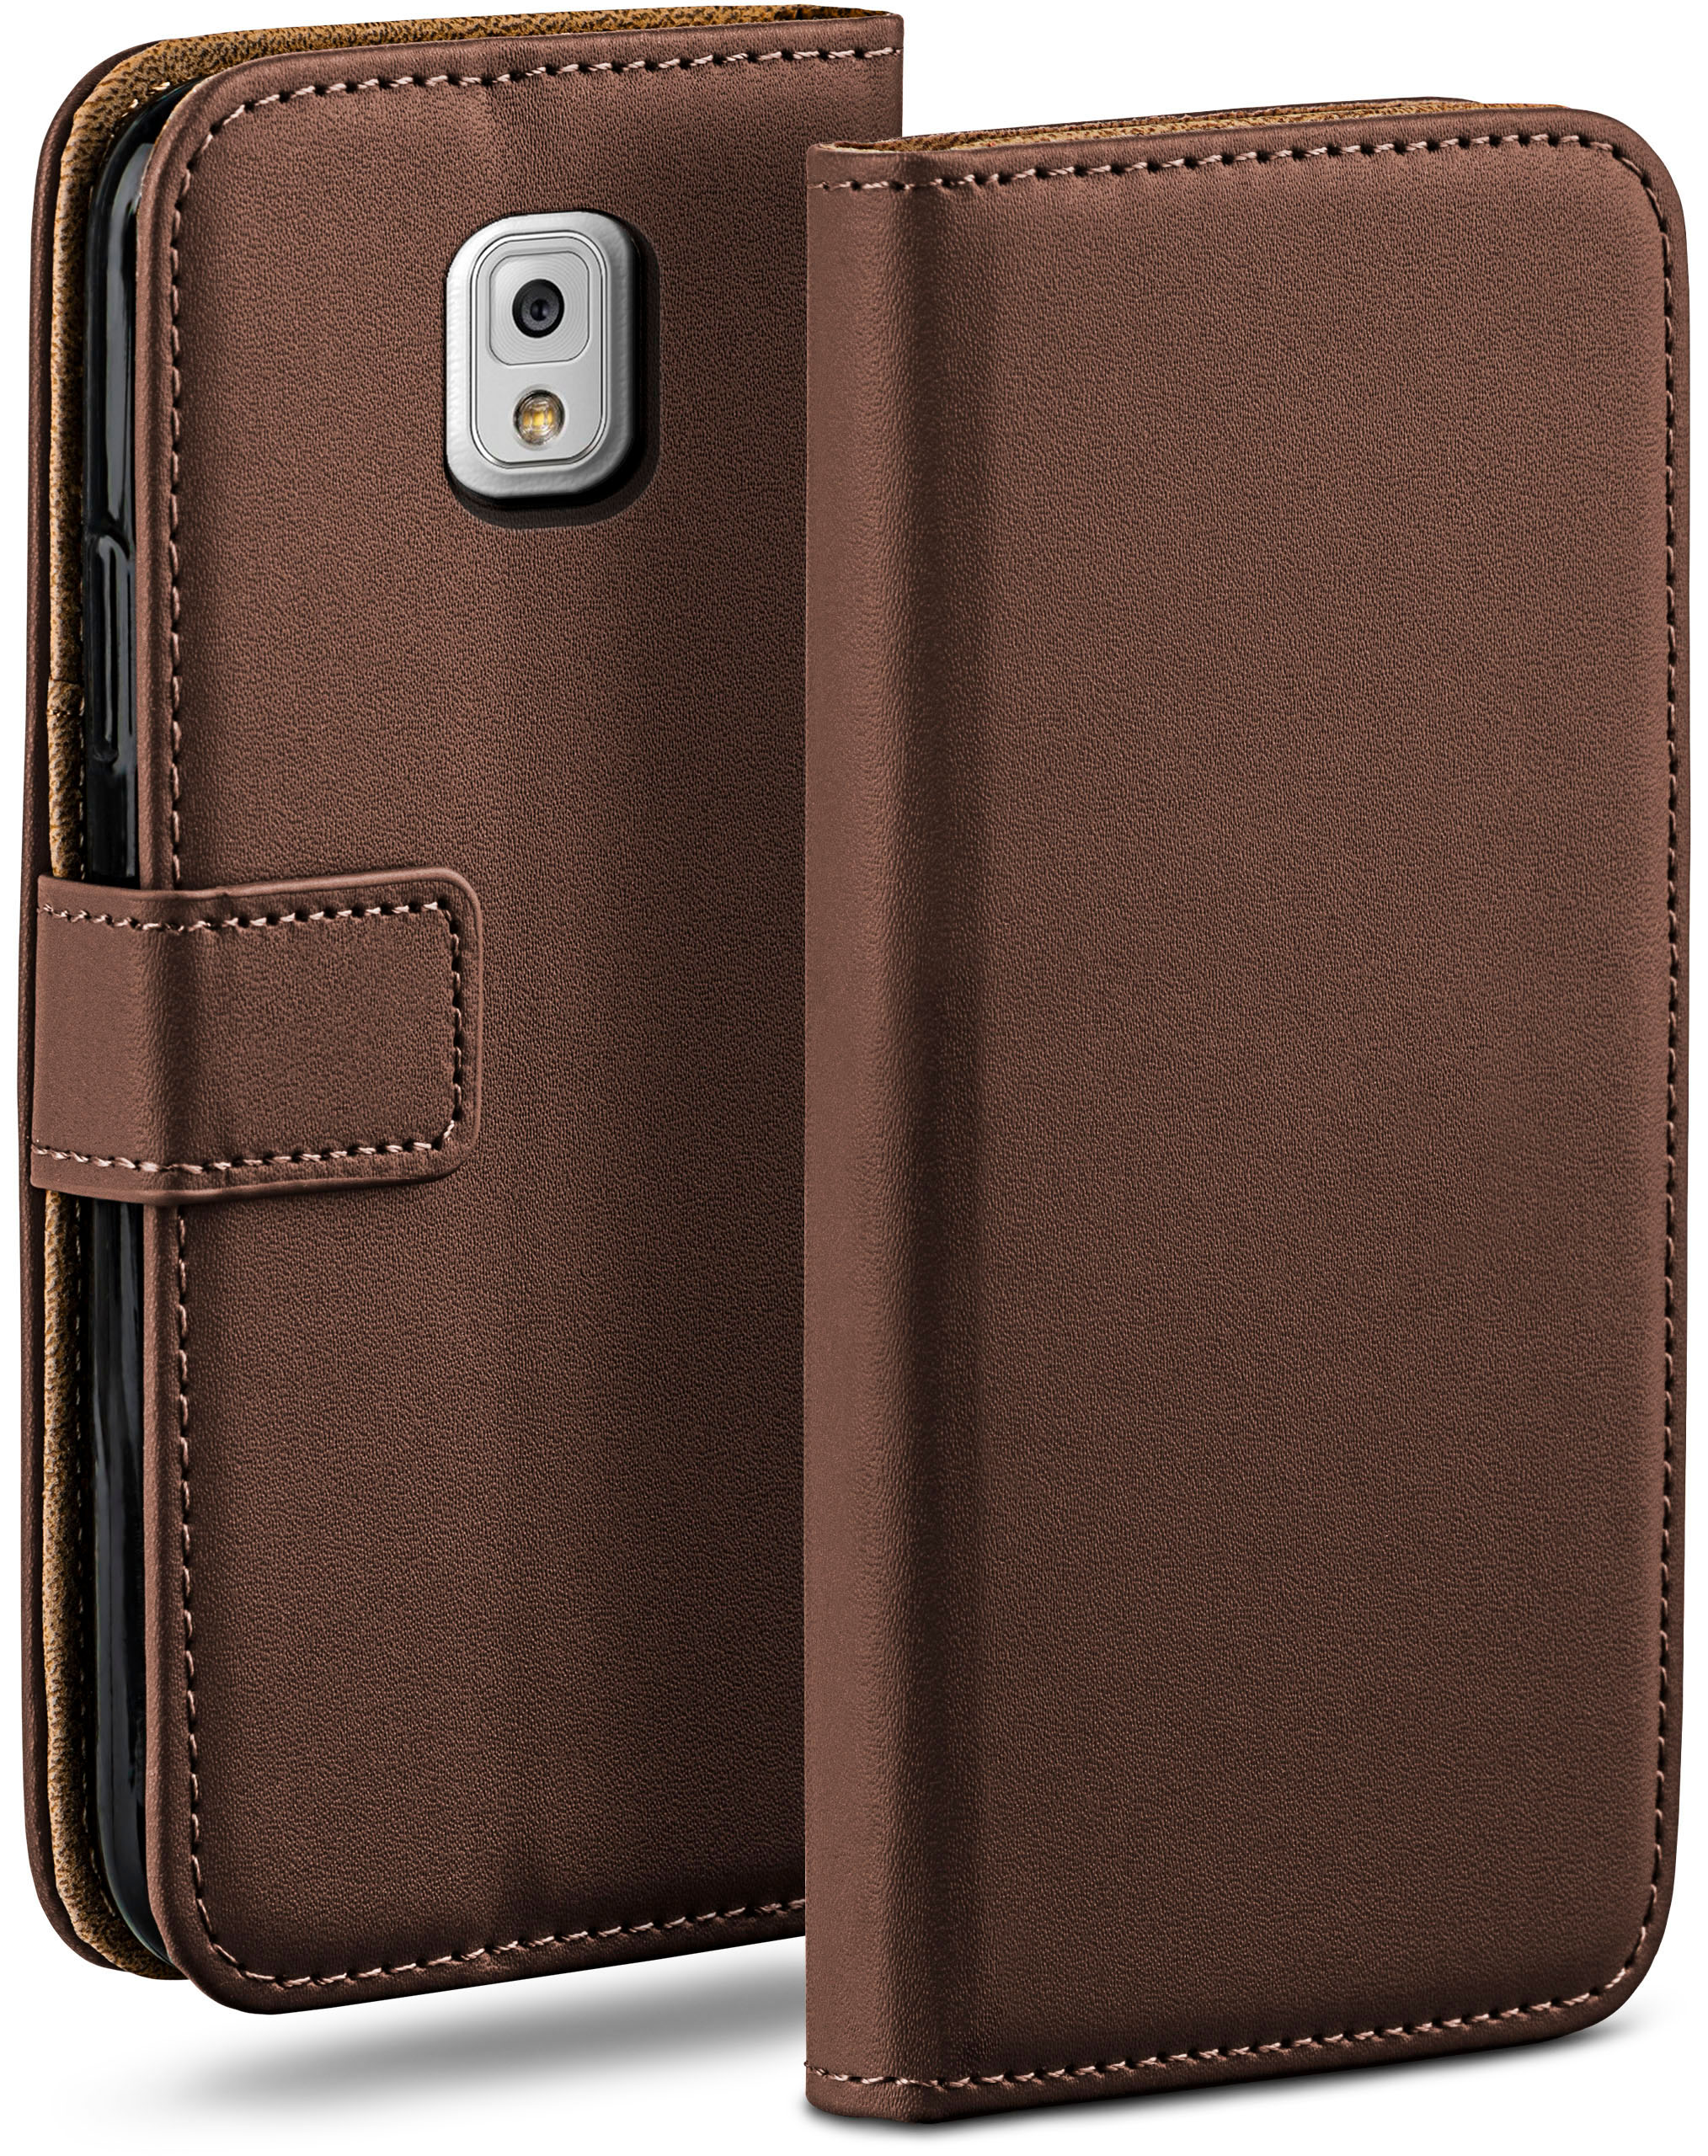 MOEX Book Bookcover, Note Samsung, Oxide-Brown Case, Galaxy 3